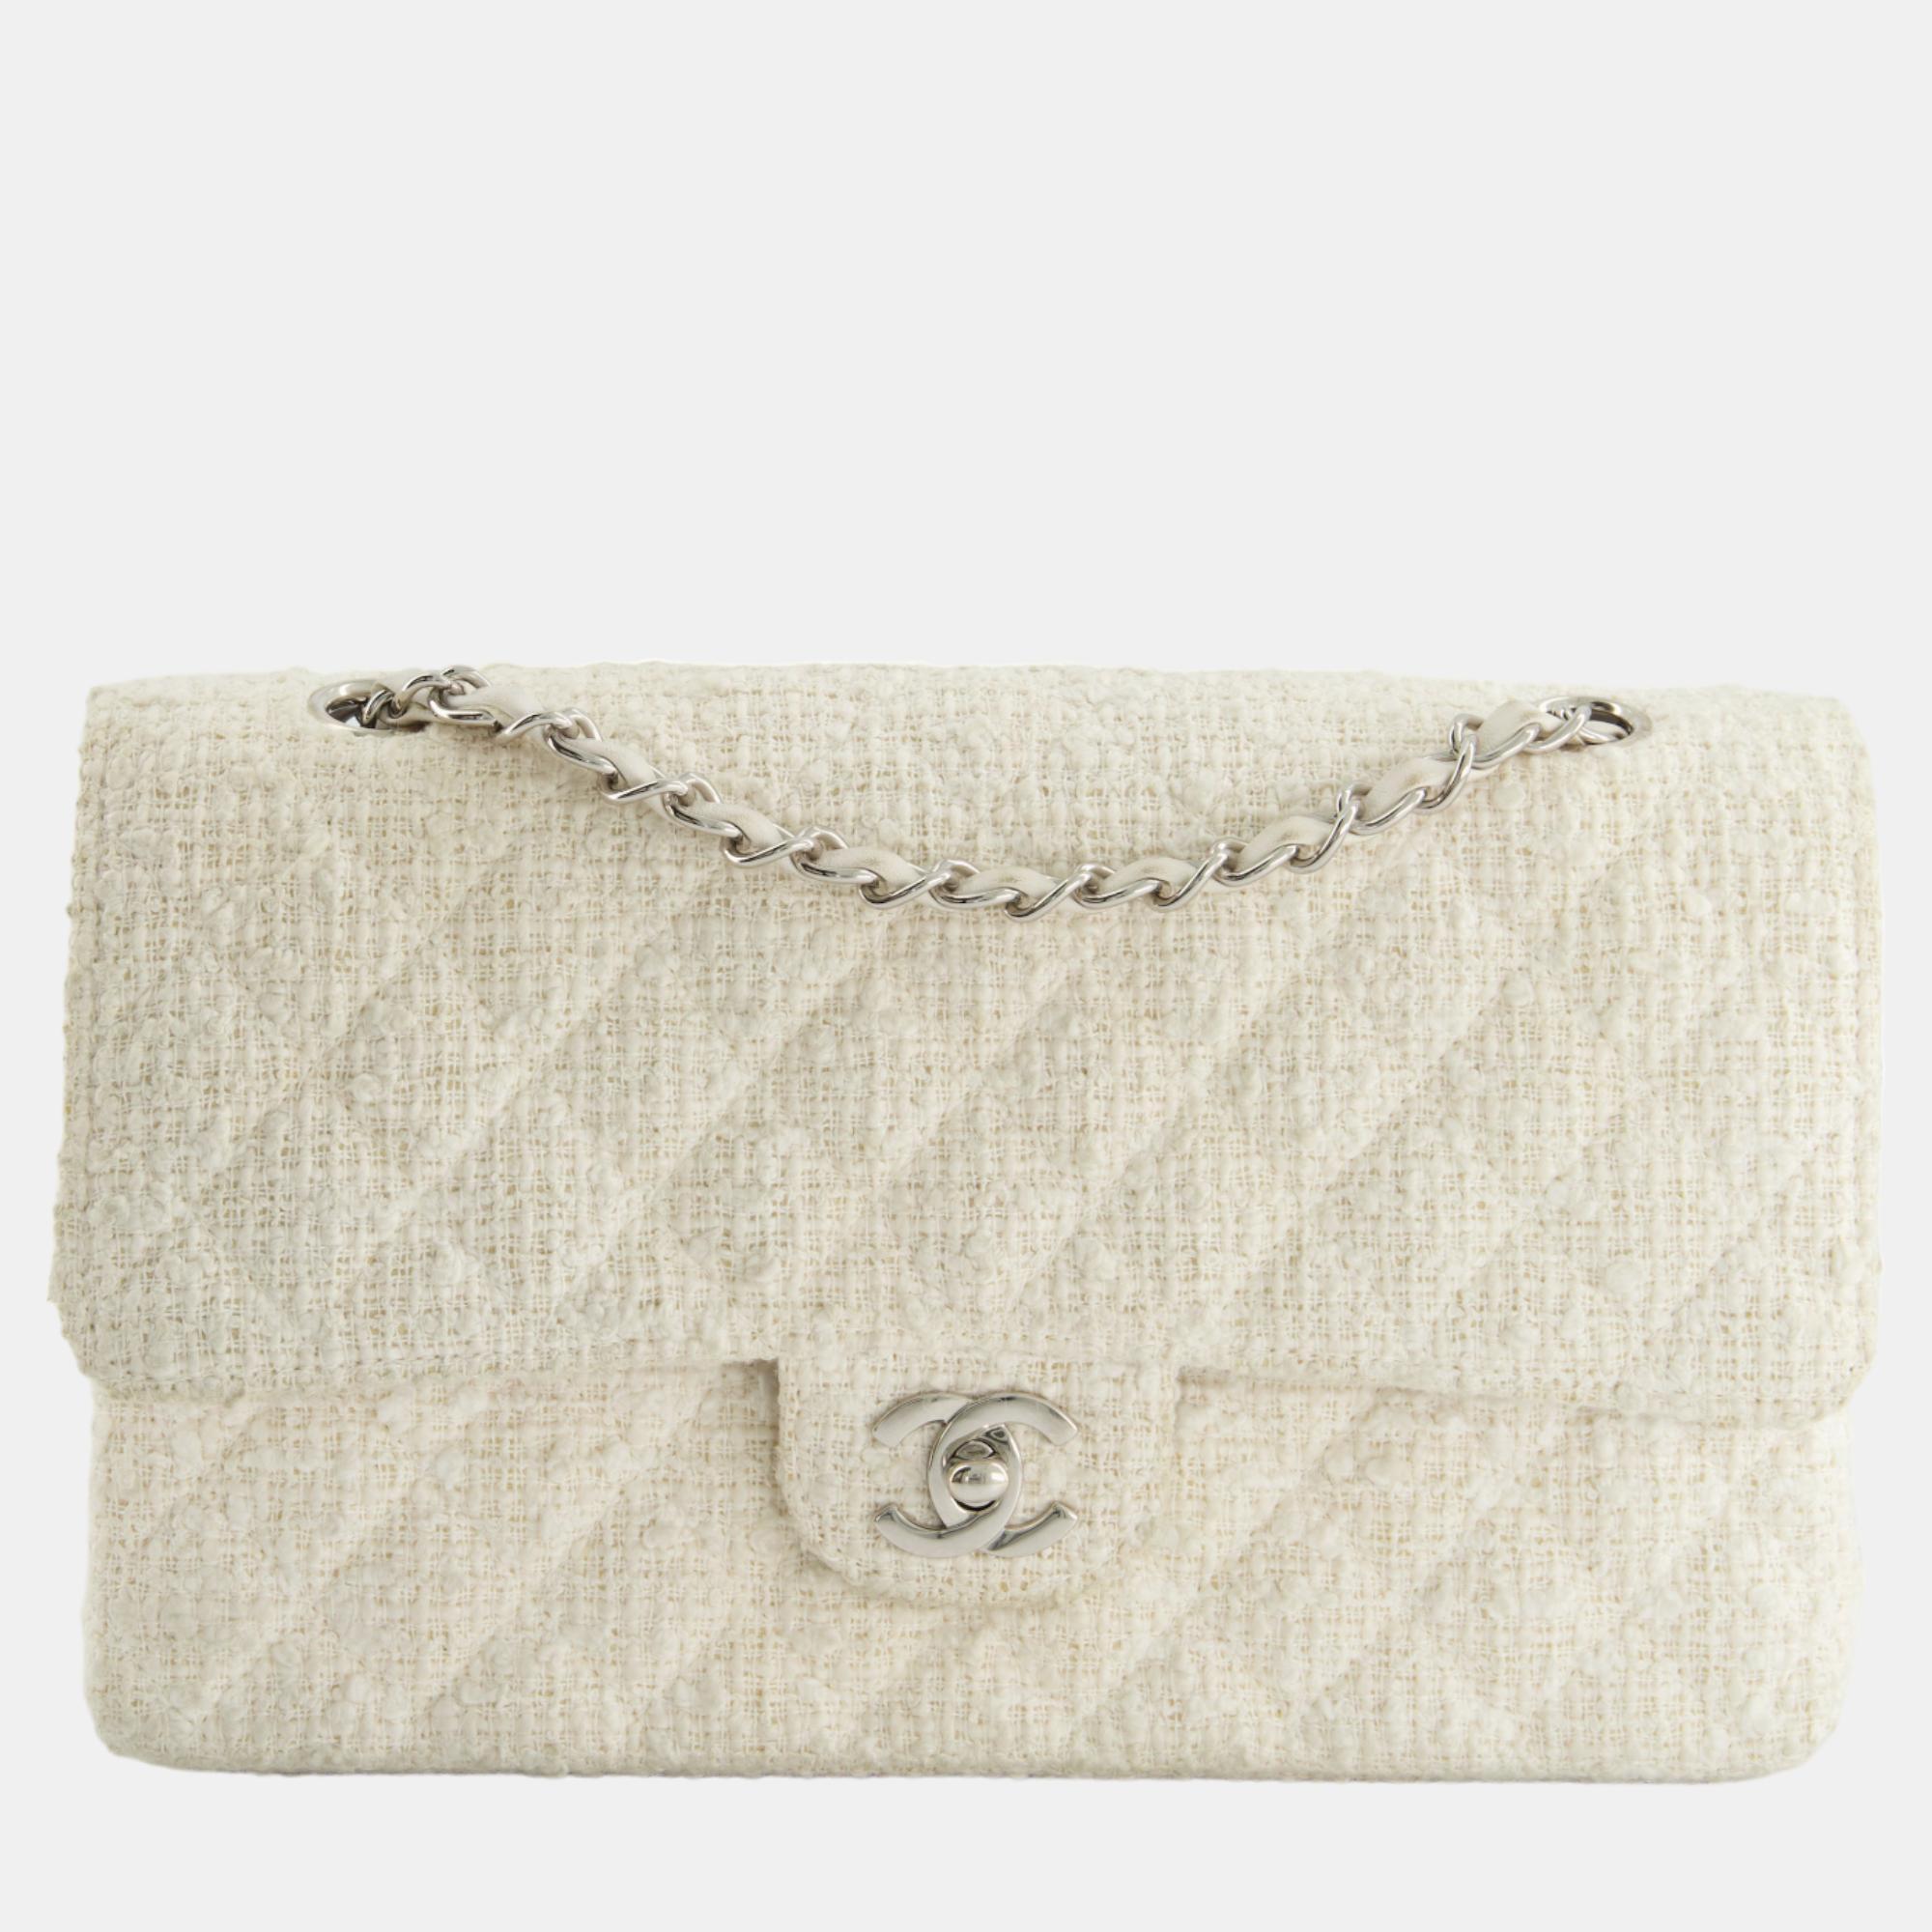 Chanel vintage white tweed classic double flap bag with silver hardware